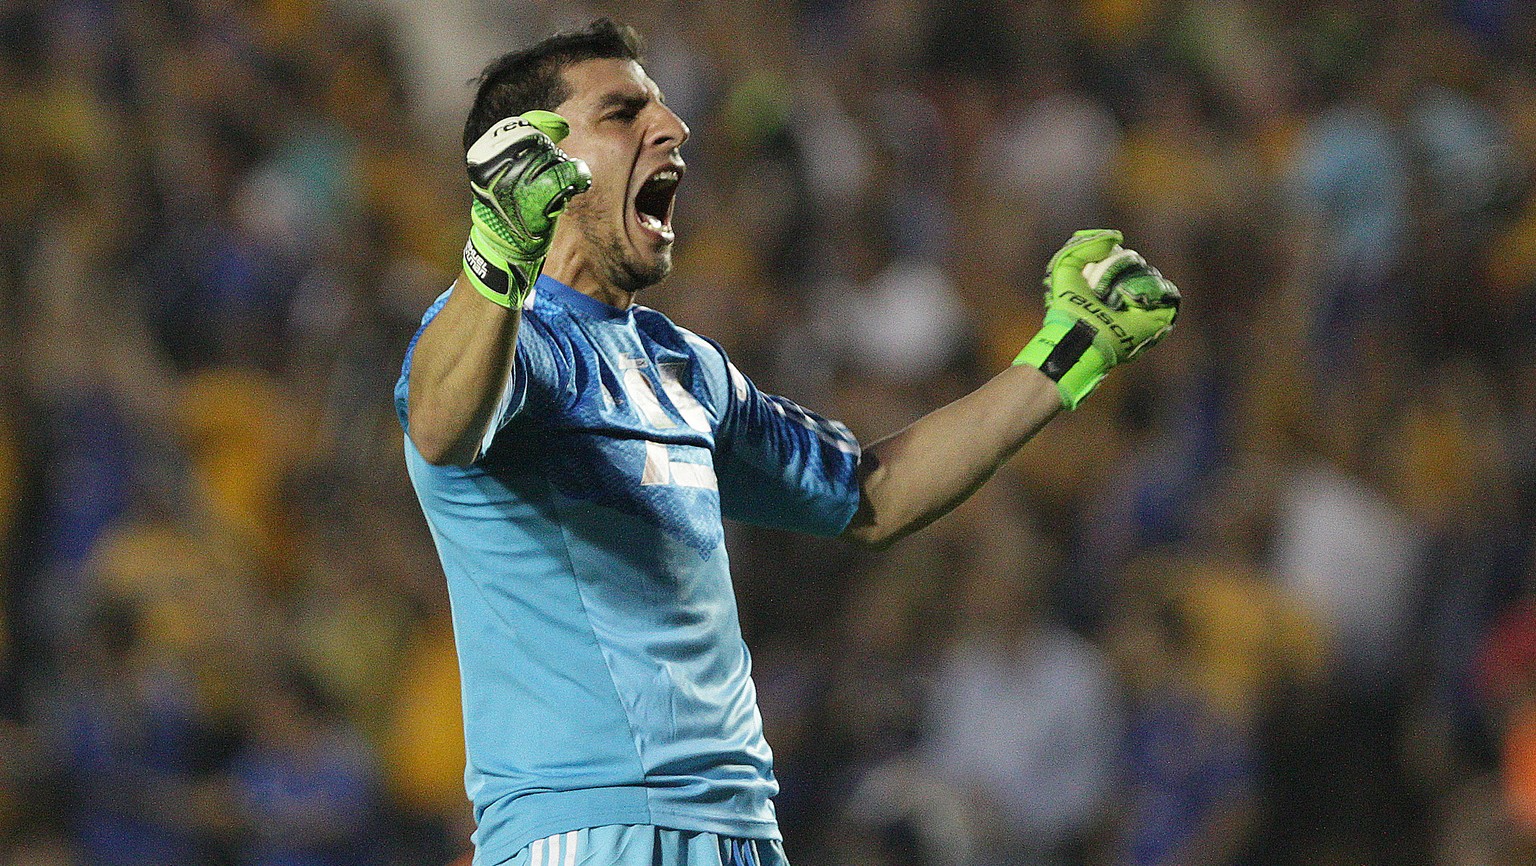 Goalie Nahuel Guzman, of Mexico&#039;s Tigres celebrates after his team scored against Argentina&#039;s River Plate during a Copa Libertadores soccer match in Monterrey, Mexico, Wednesday, April 8, 20 ...